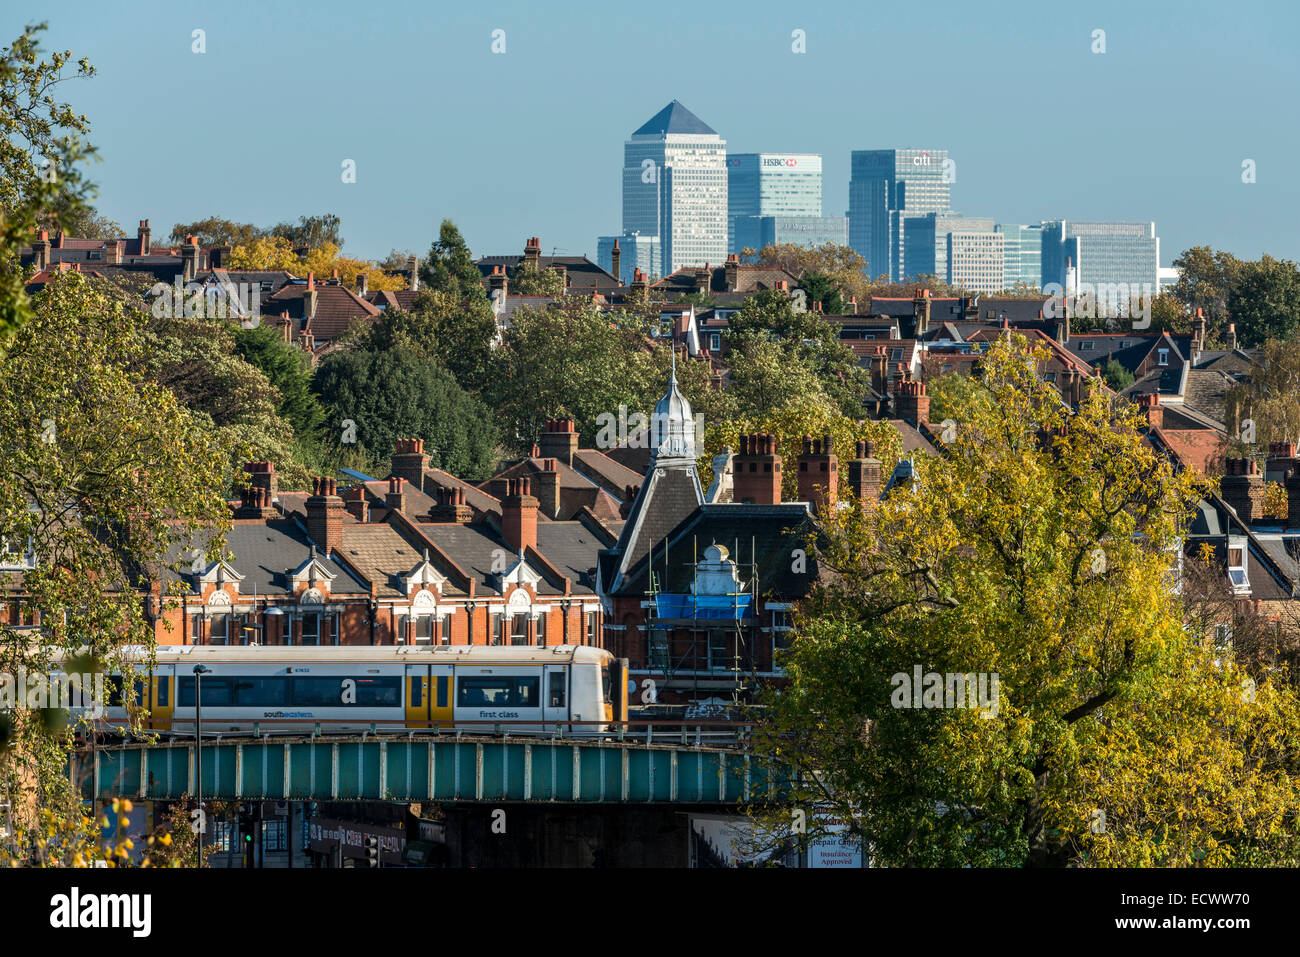 Views of Canary Wharf, the second financial district of London viewed across the rooftops of Herne Hill in South London Stock Photo